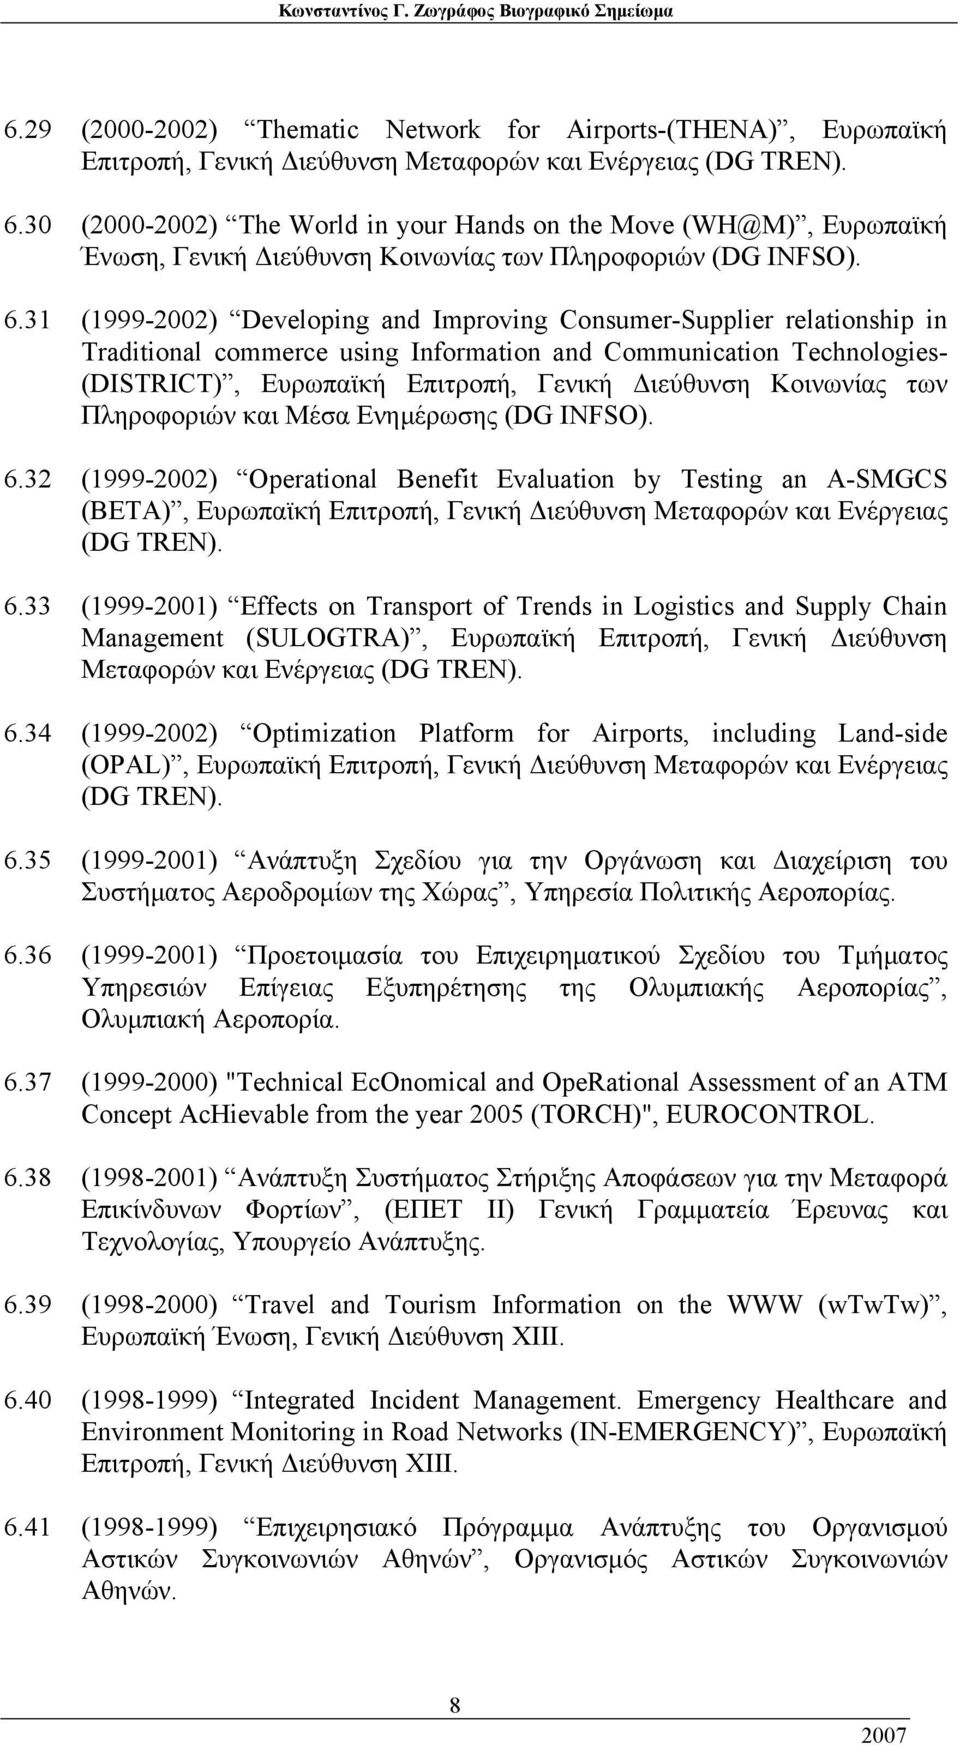 31 (1999-2002) Developing and Improving Consumer-Supplier relationship in Traditional commerce using Information and Communication Technologies- (DISTRICT), Ευρωπαϊκή Επιτροπή, Γενική Διεύθυνση